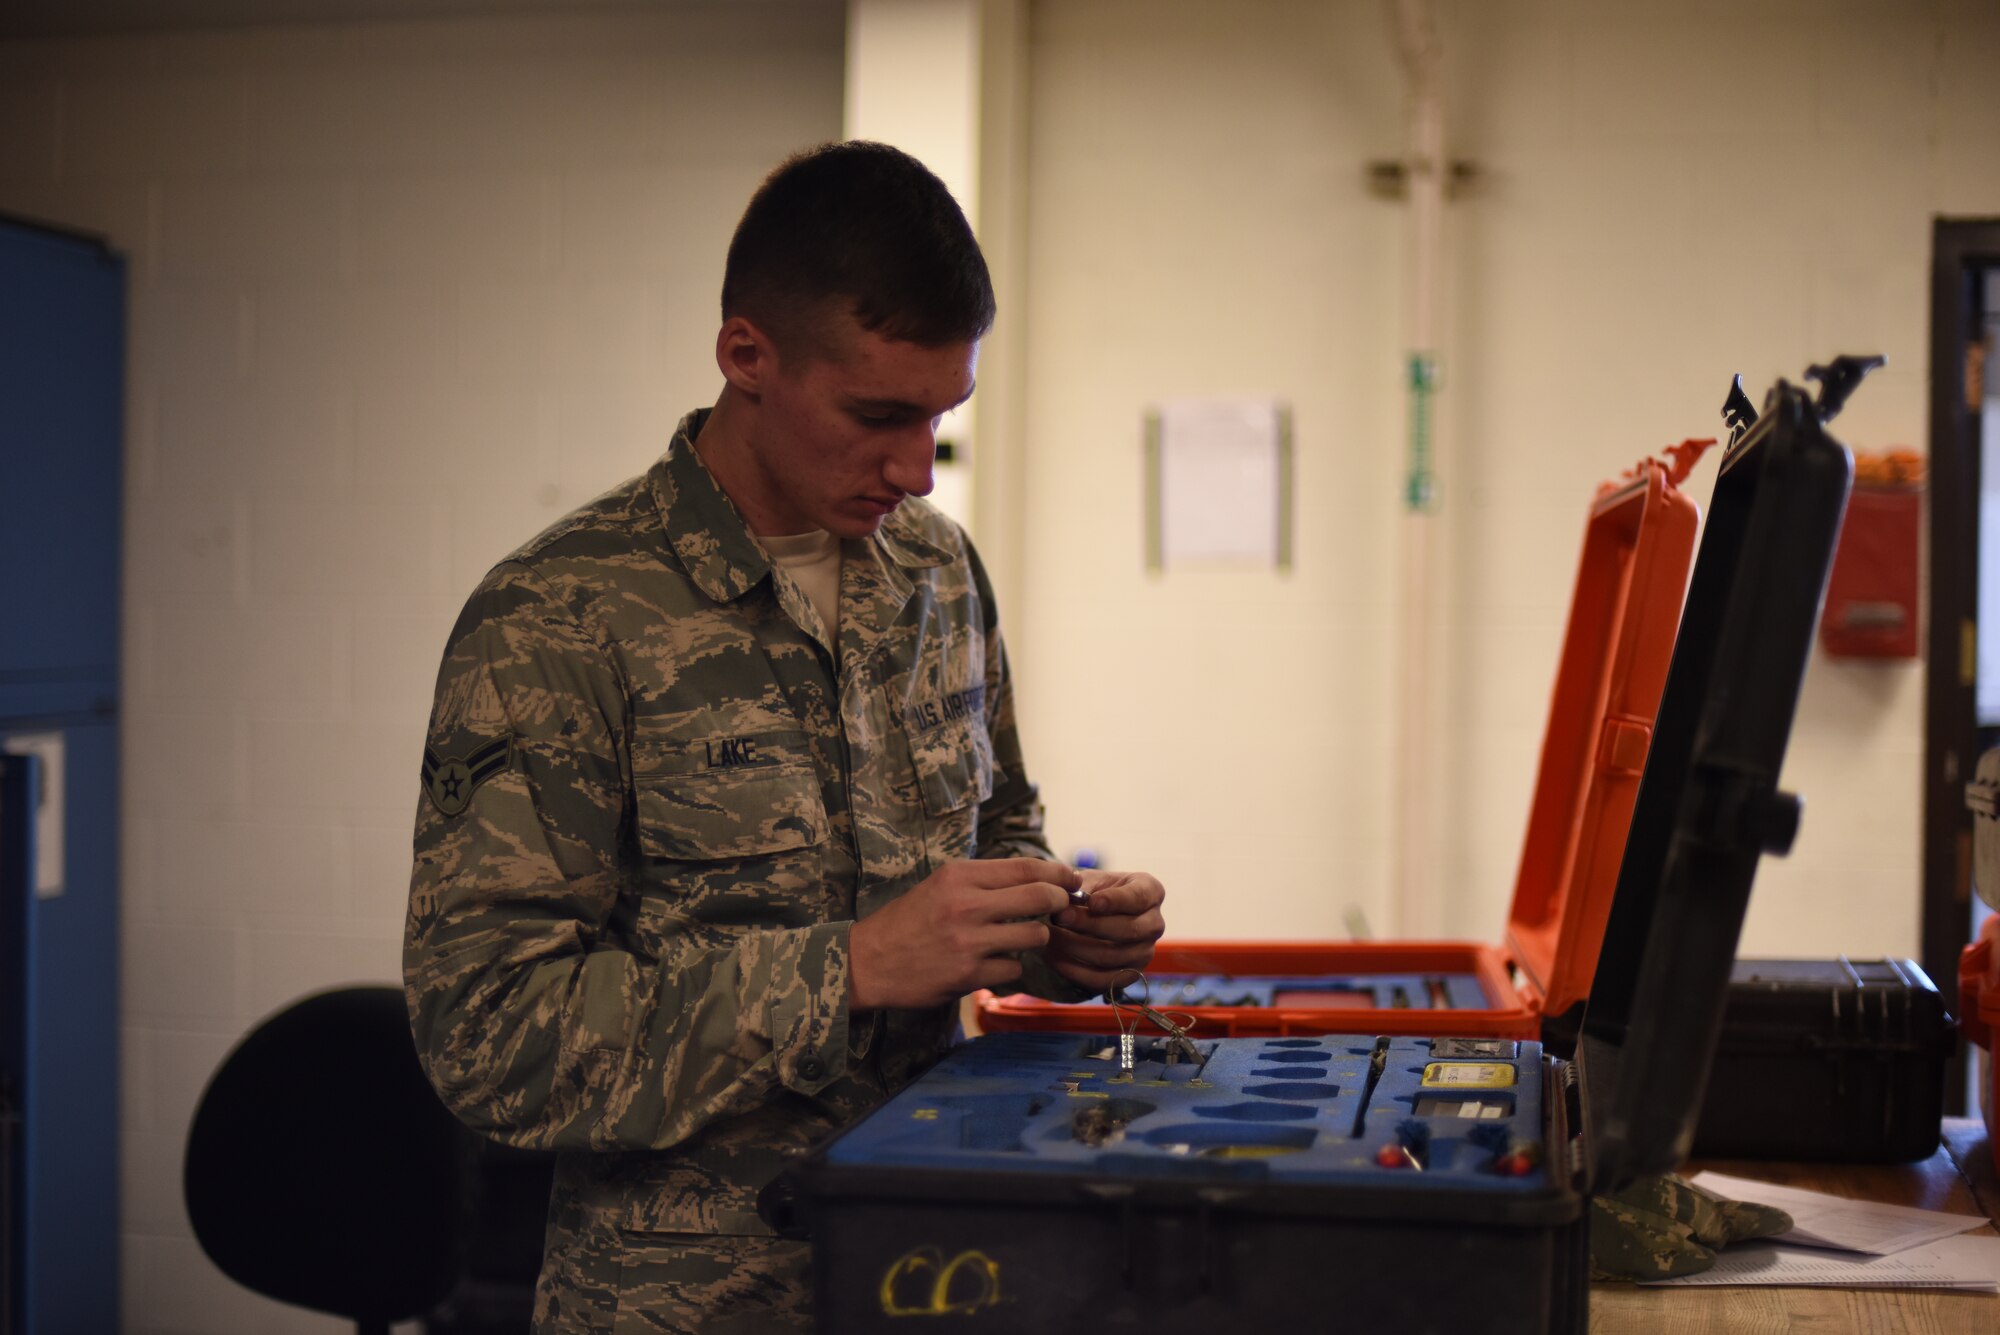 U.S. Air Force Airman 1st Class Drew Lake, a 341st Missile Maintenance Squadron tool technician, organizes and cleans a tool kit at Malmstrom Air Force Base, Mont., Oct. 20, 2014 during Global Thunder 15. During the exercise, maintenance personnel reviewed their procedures while performing day-to-day operations. Global Thunder is a U.S. Strategic Command annual field training and battle staff exercise designed to exercise all mission areas with primary emphasis on nuclear command, control and communications. This field training and battle staff exercise provides training opportunities for components, task forces, units, and command posts to deter and, if necessary, defeat a military attack against the United States and to employ forces as directed by the president. (U.S. Air Force photo by Airman 1st Class Collin Schmidt)